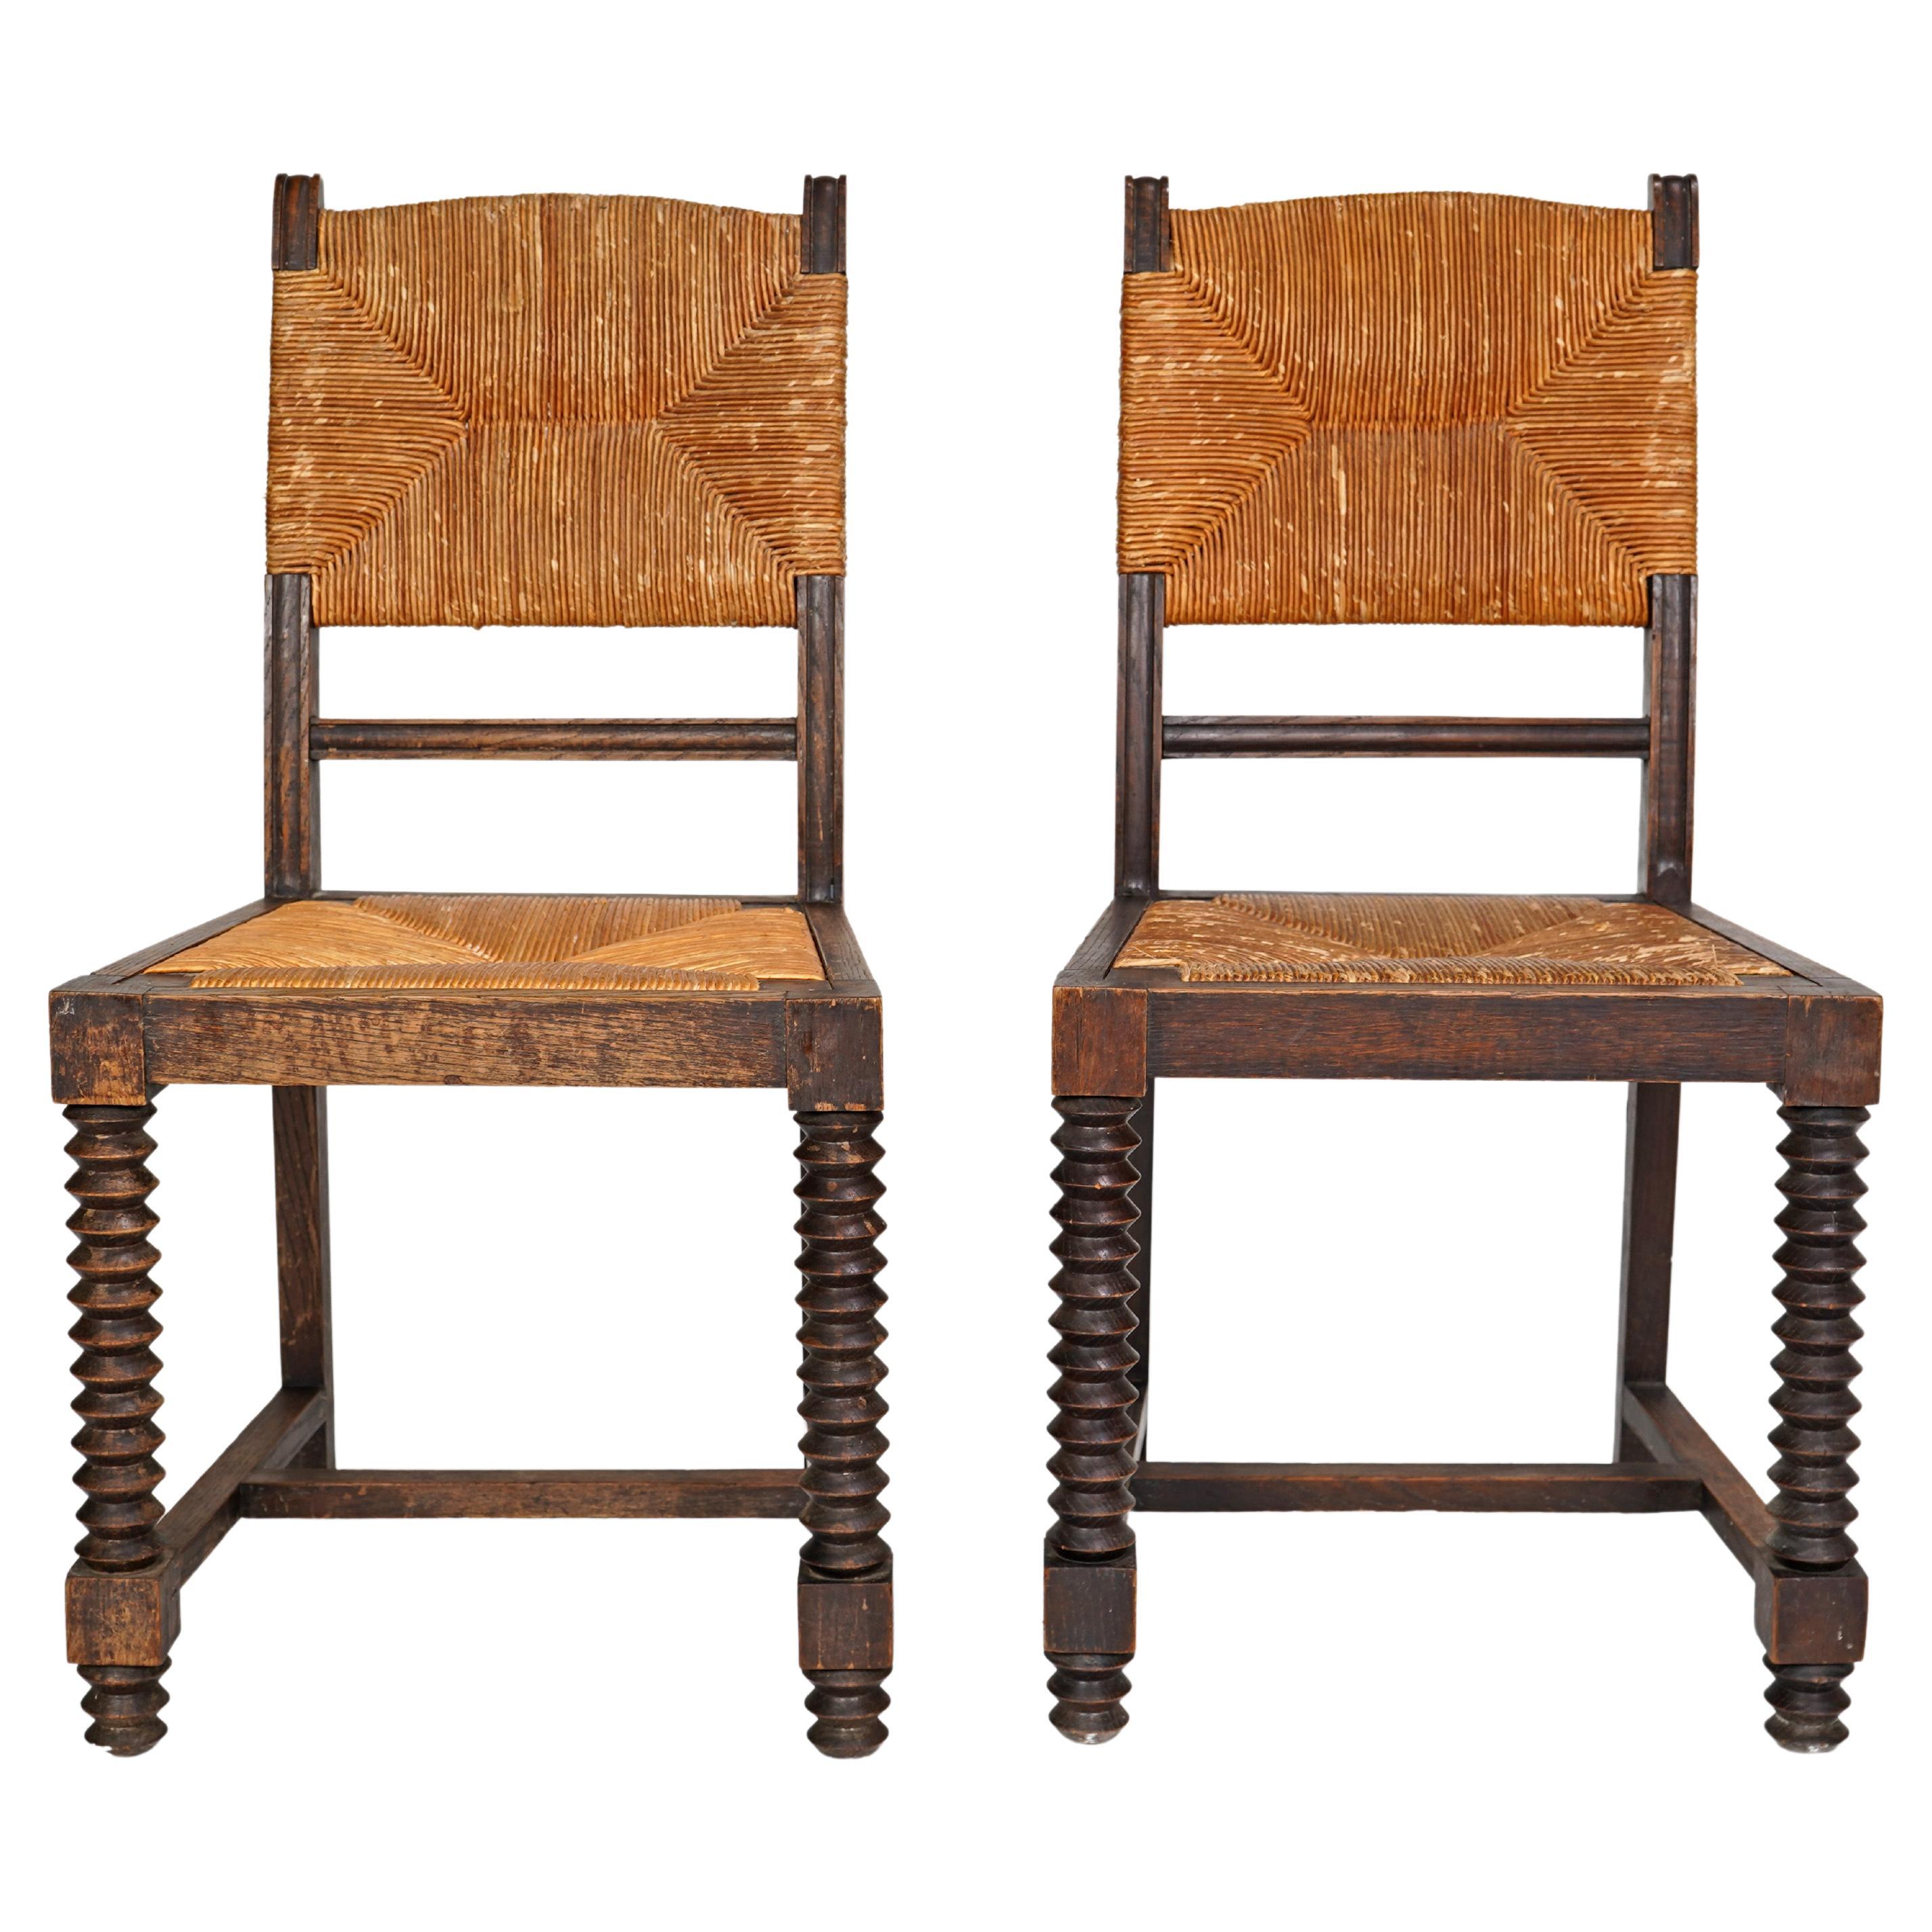 Pair Of French Charles Dudouyt Style Chairs - Wooden with Rush Seat For Sale